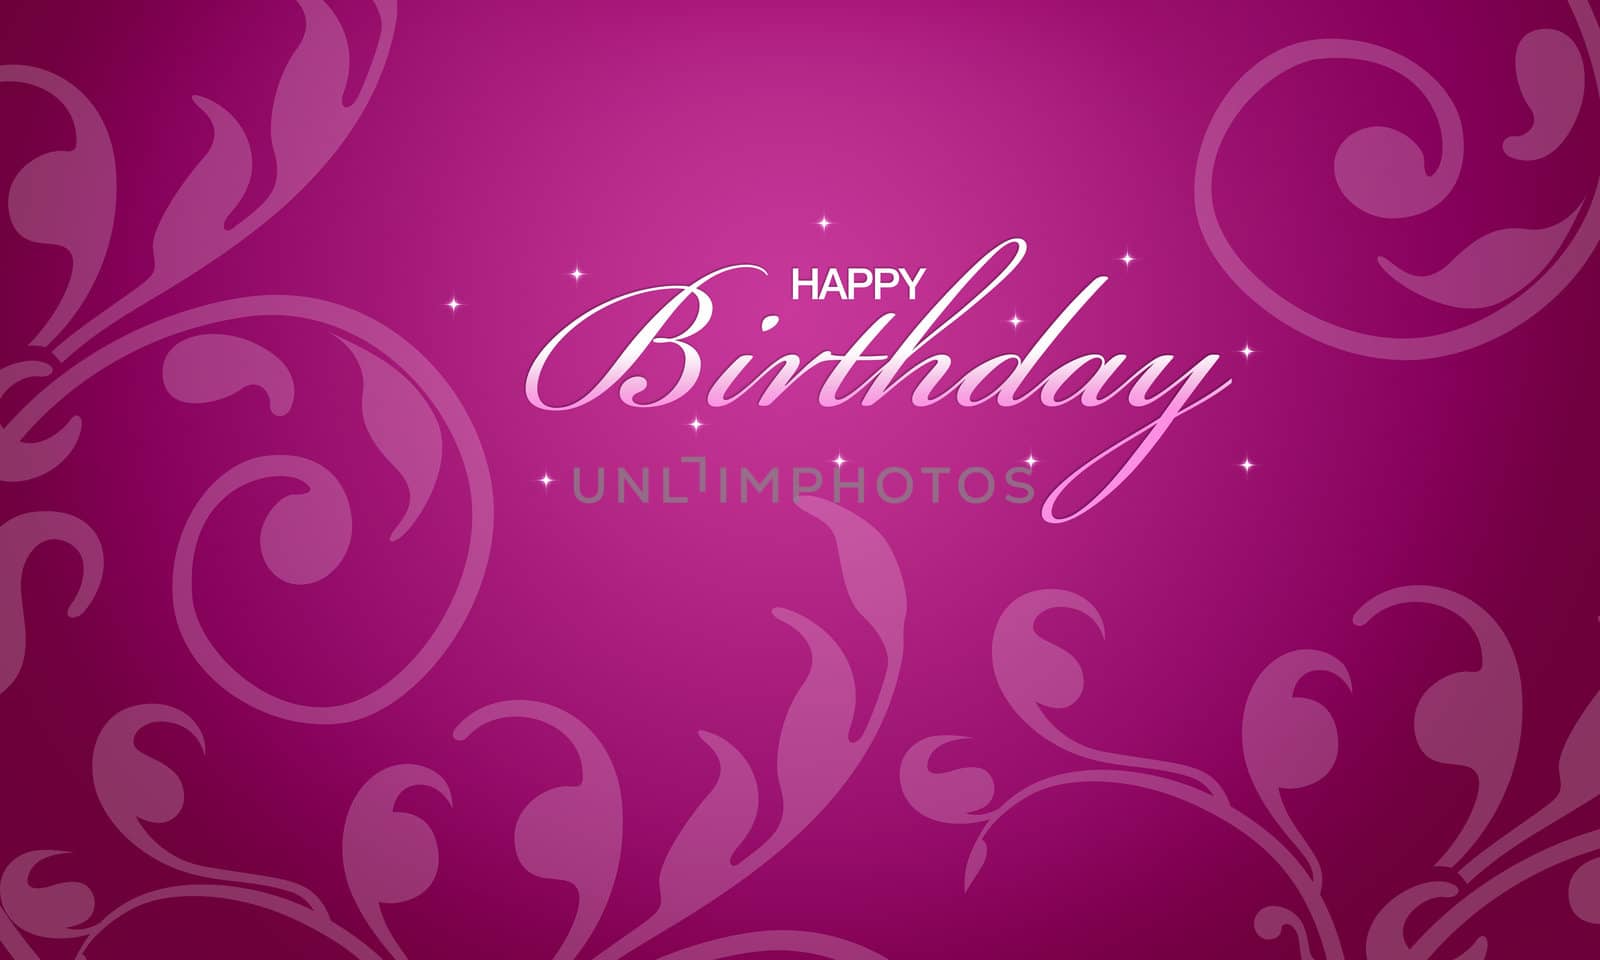 Pink happy birthday card with floral elements.